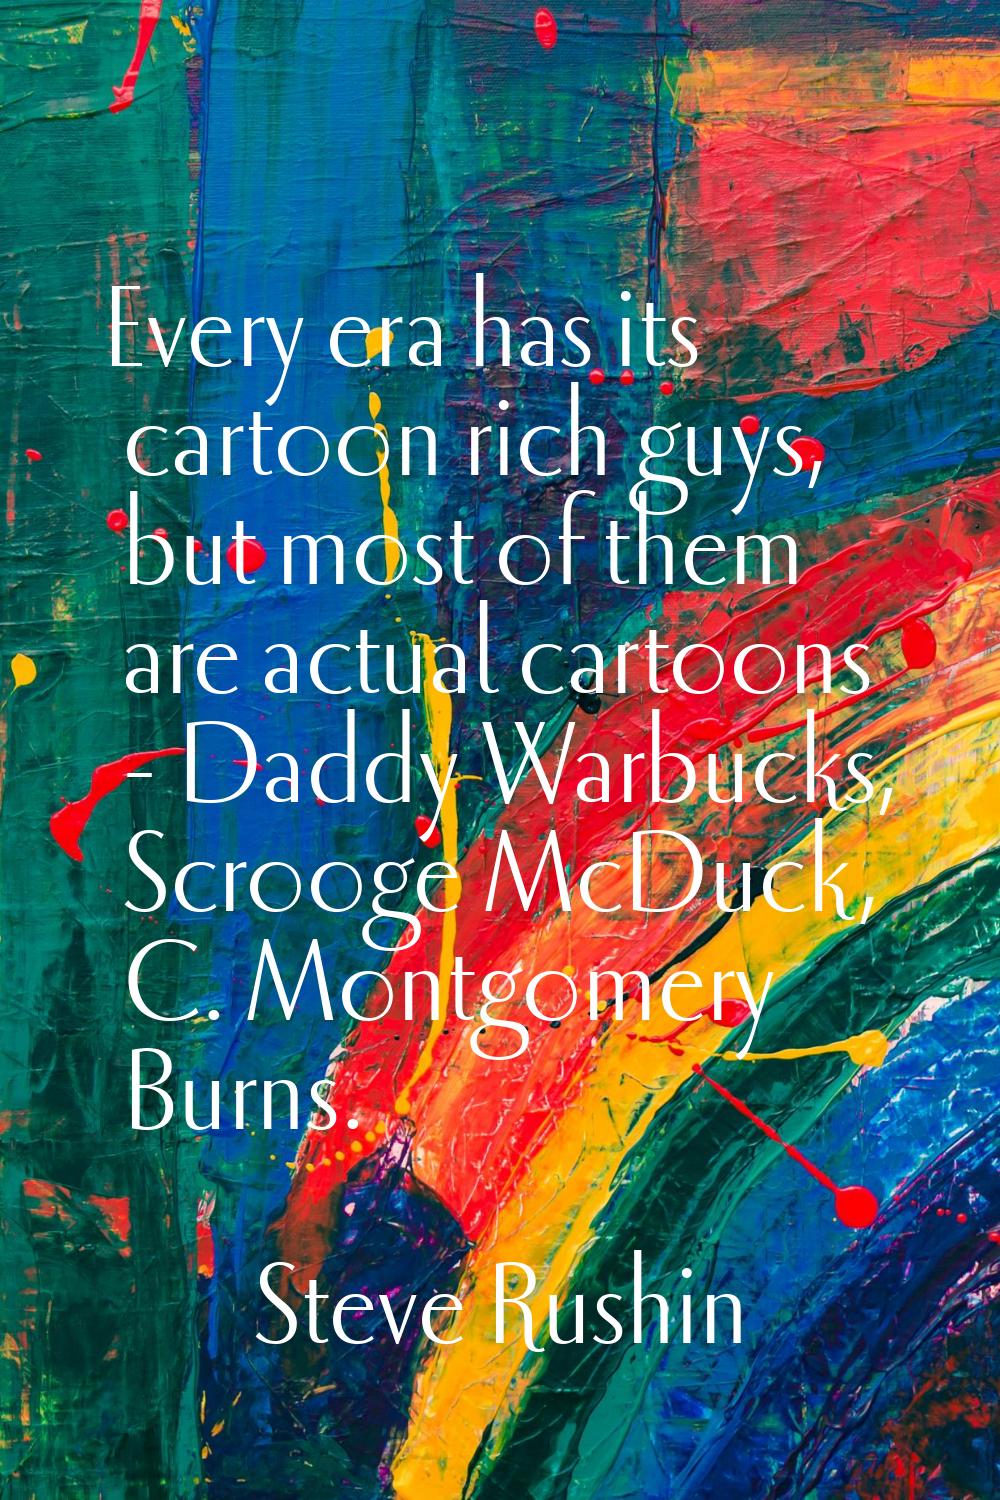 Every era has its cartoon rich guys, but most of them are actual cartoons - Daddy Warbucks, Scrooge